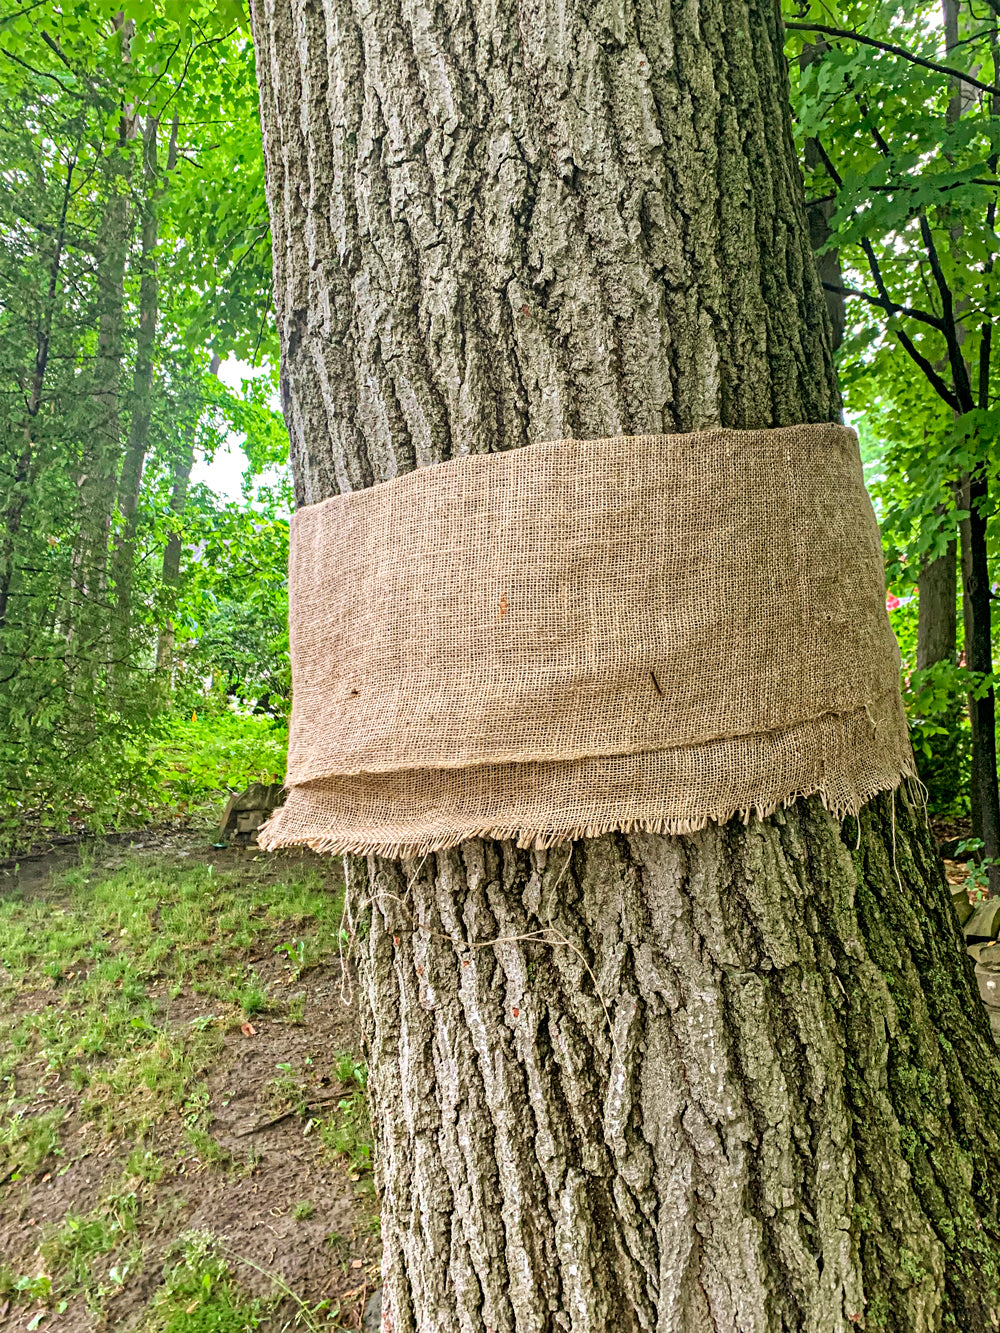 How to Control Invasive Spongy Moths (formerly known as Gypsy Moths) by Wrapping Your Trees with Burlap